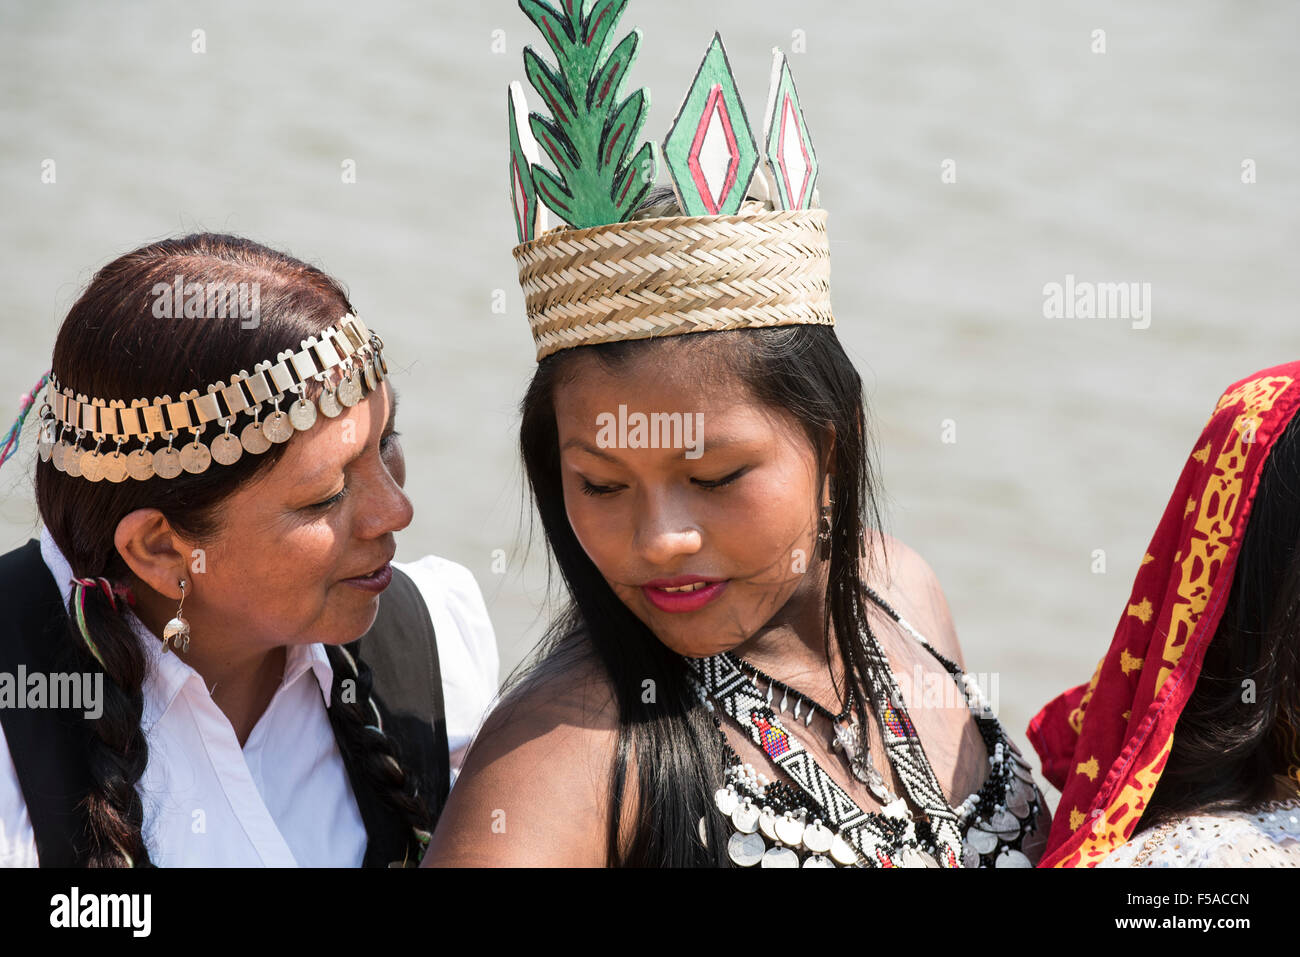 Palmas, Tocantins State, Brazil. 29th October, 2015. Two indigenous contestants from Latin America share a quiet moment during the International Indigenous Games, in the city of Palmas, Tocantins State, Brazil. Credit:  Sue Cunningham Photographic/Alamy Live News Stock Photo